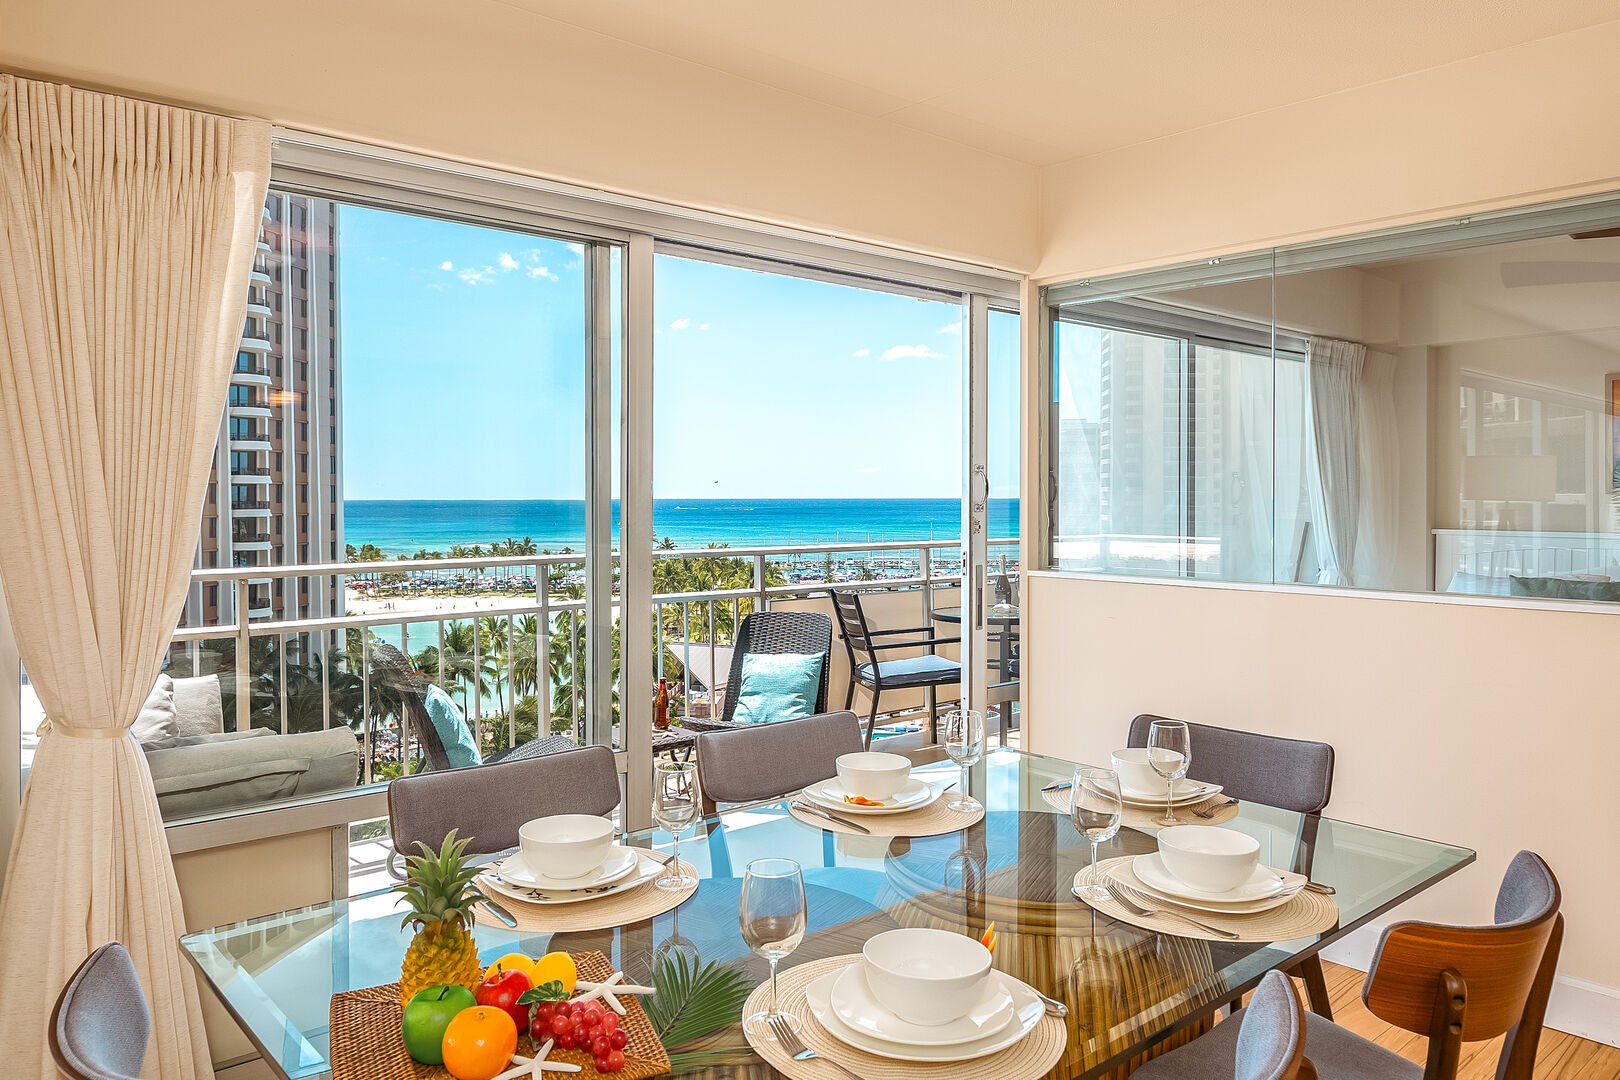 Enjoy shared meals at the dining table with 6 chairs, and a beautiful ocean view.